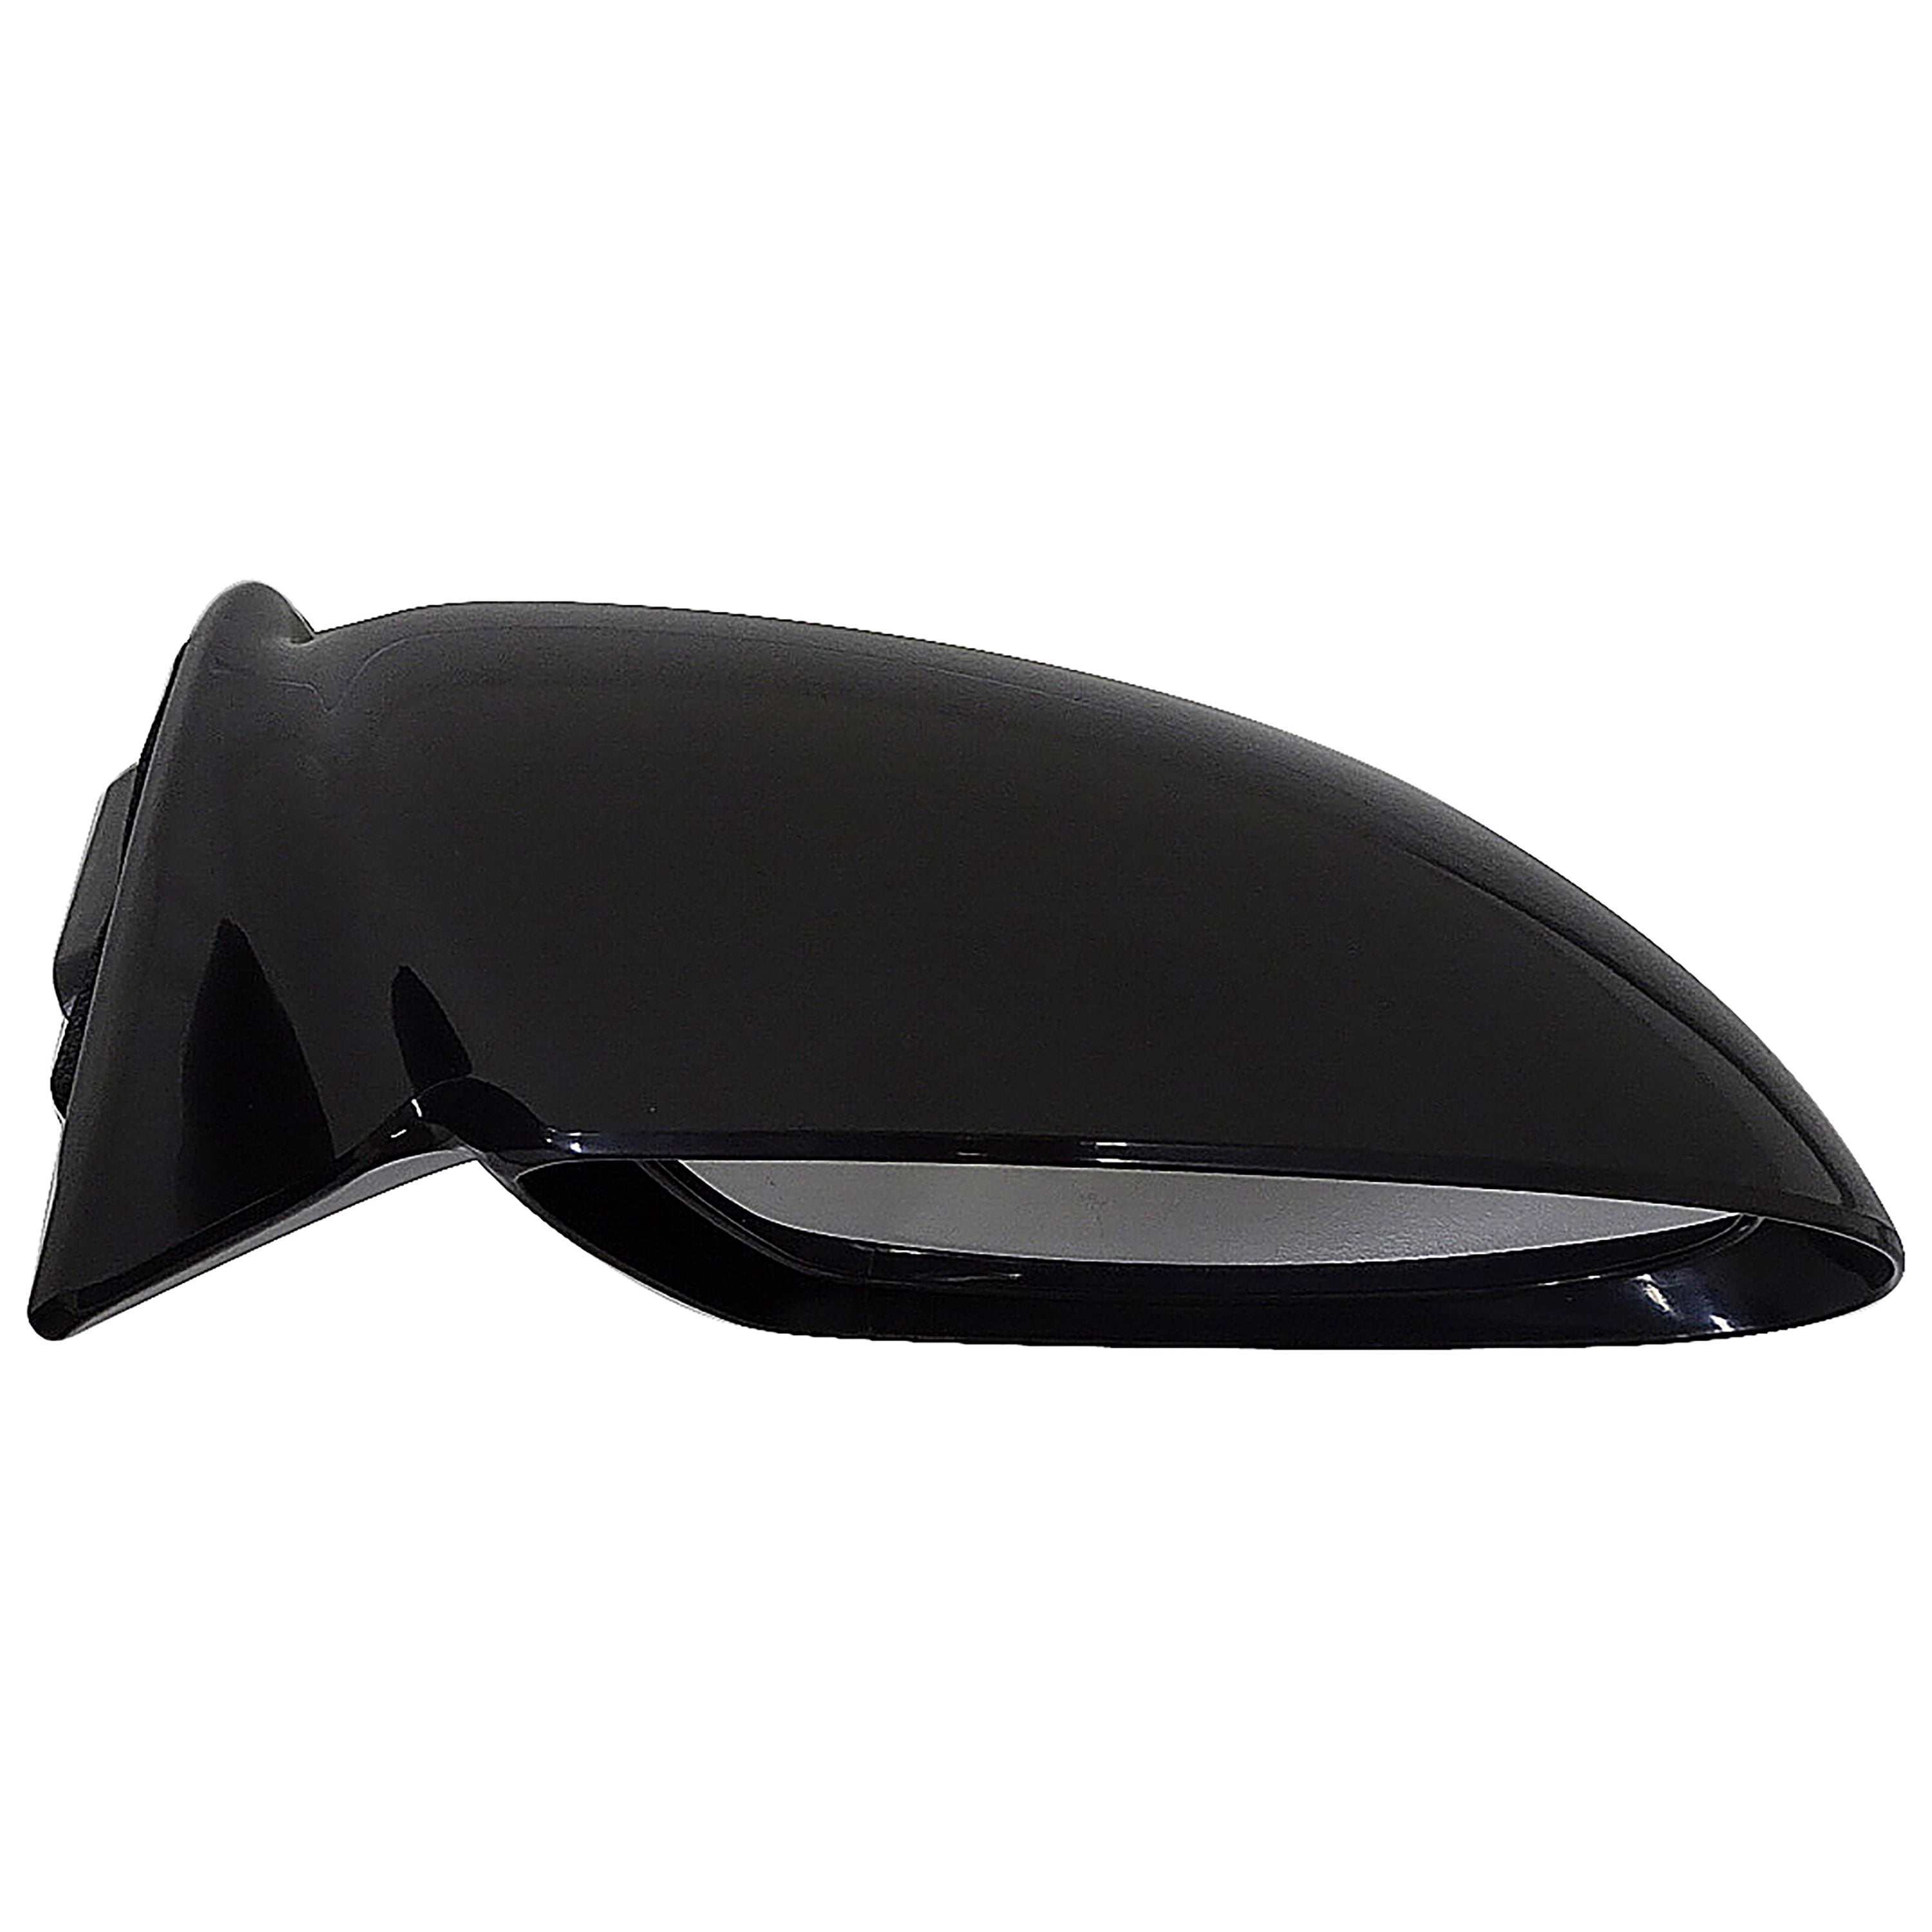 Dorman 955-1200 Passenger Side Side View Mirror Manual for Select